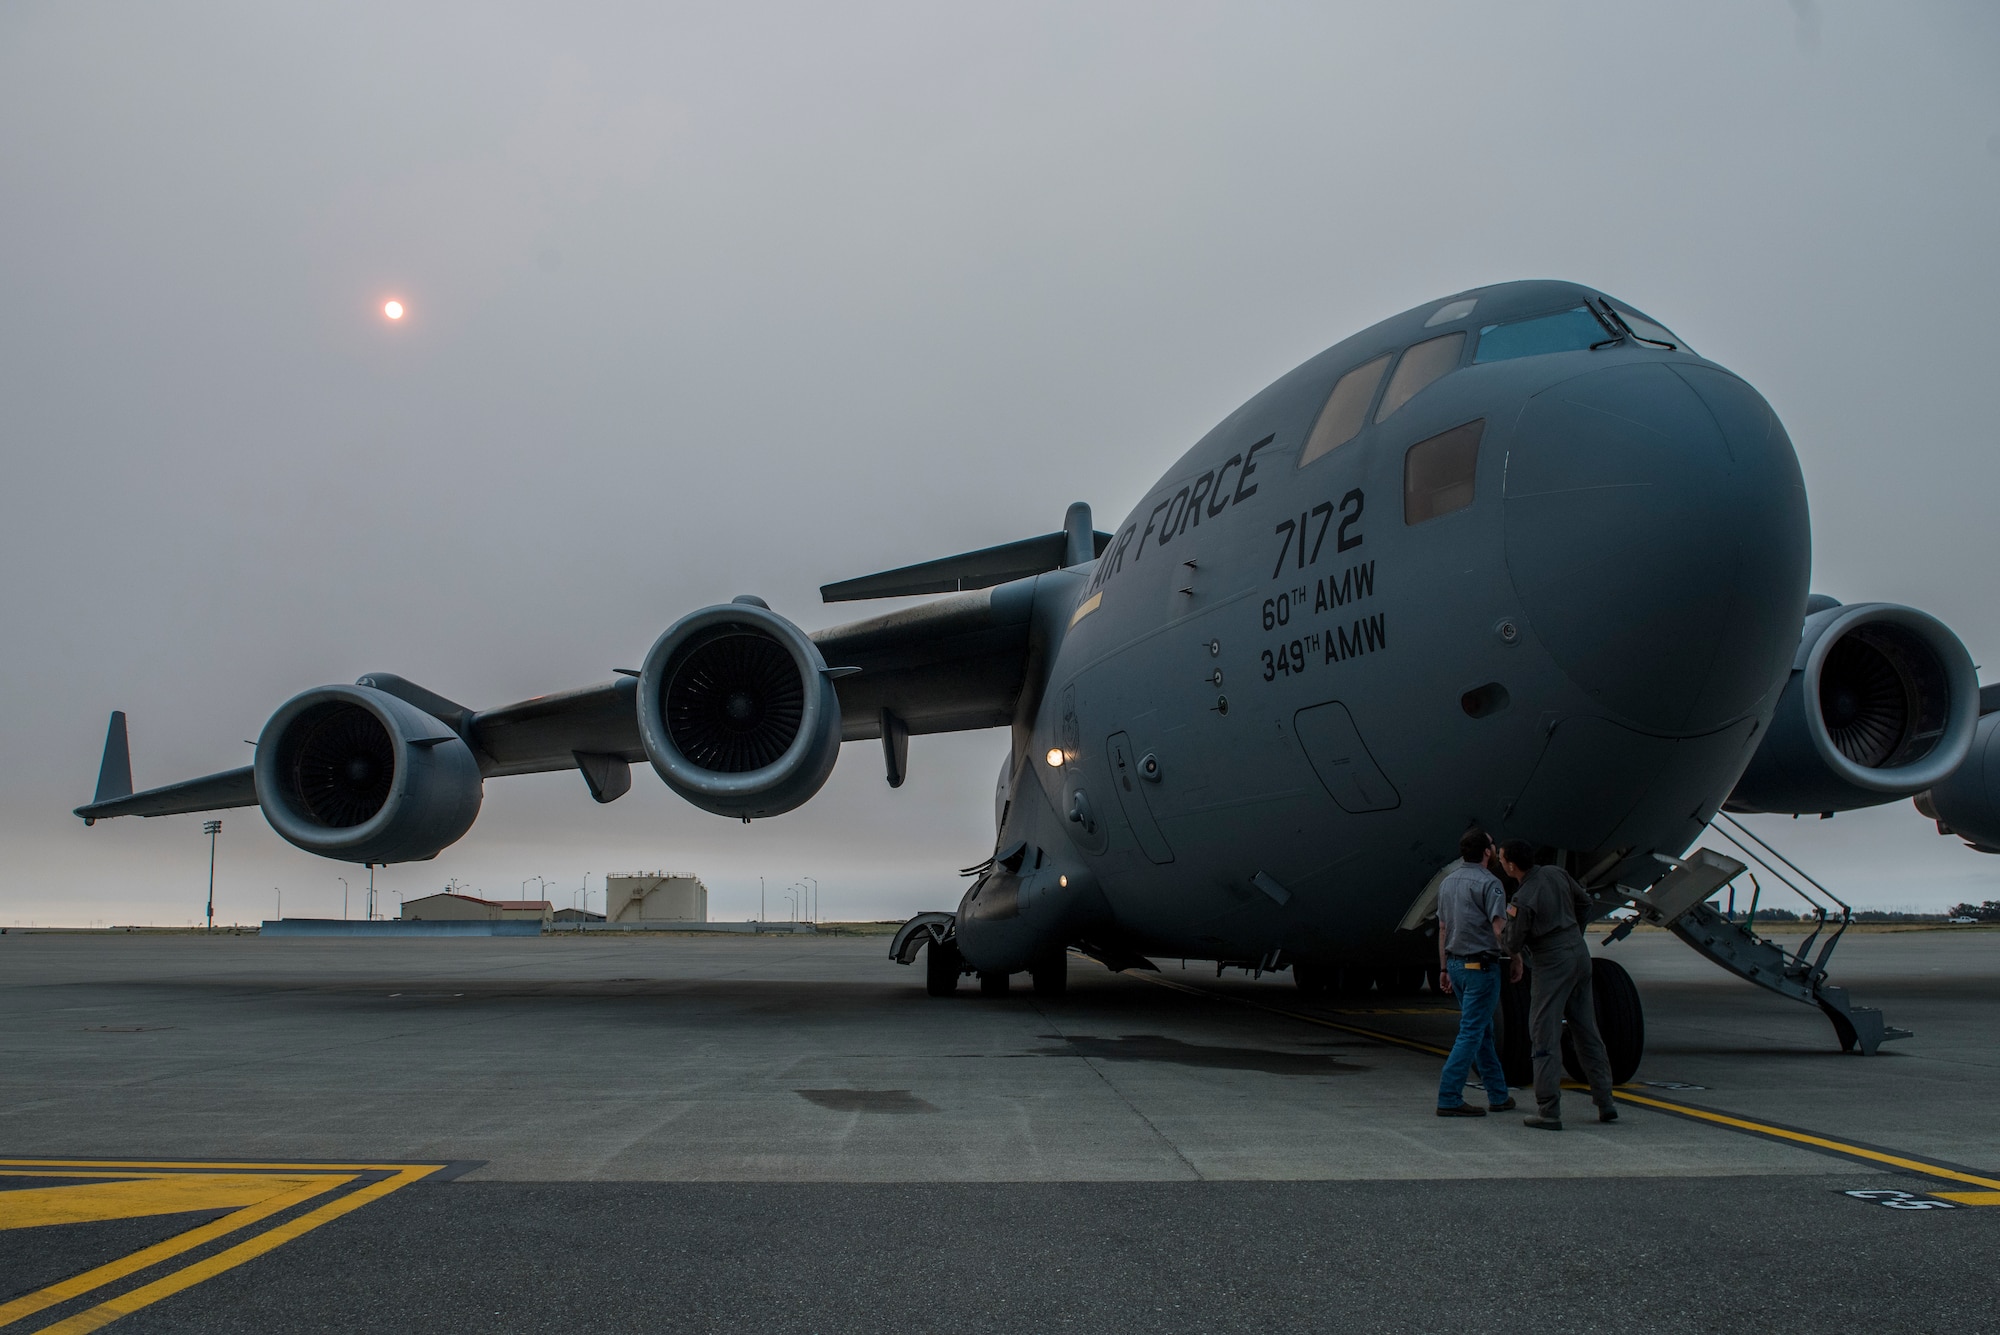 Matt Stevens, left, a U.S. Department of Agriculture airport biologist, and U.S. Air Force Capt. Sean Harte, 60th Air Mobility Wing Safety Office flight commander, go over C-17 Globemaster III pre-flight procedures before a safety familiarization flight at Travis Air Force Base, Calif., July 2, 2018. The flight allowed Stevens, who helps manage the Bird/Wildlife Aircraft Strike Program at Travis to get a firsthand view of what pilots see during training flights near the base. (U.S. Air Force photo by Master Sgt. Joey Swafford)